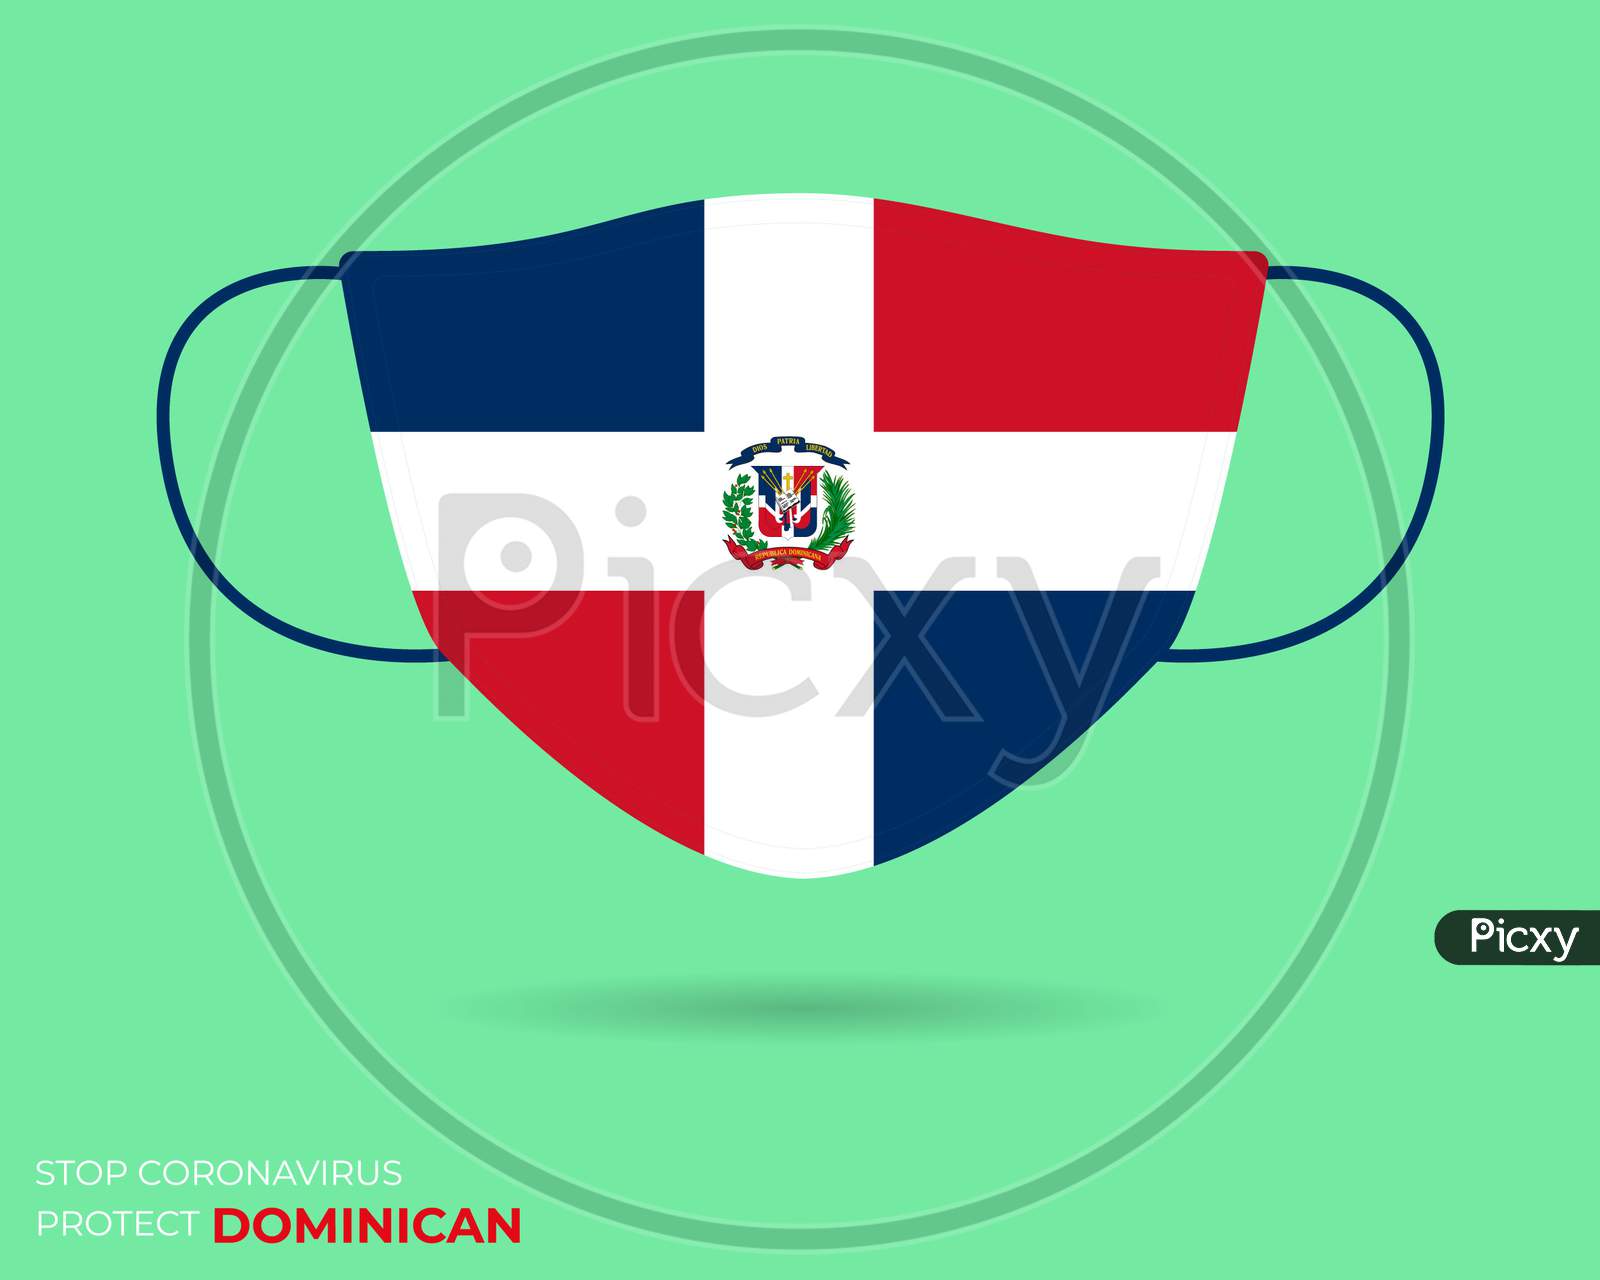 Coronavirus In Dominican.Graphic Vector Of Surgical Mask With Dominican Flag.(2019-Ncov Or Covid-19). Medical Face Mask As Concept Of Coronavirus Quarantine. Coronavirus Outbreak. Use For Printing Eps